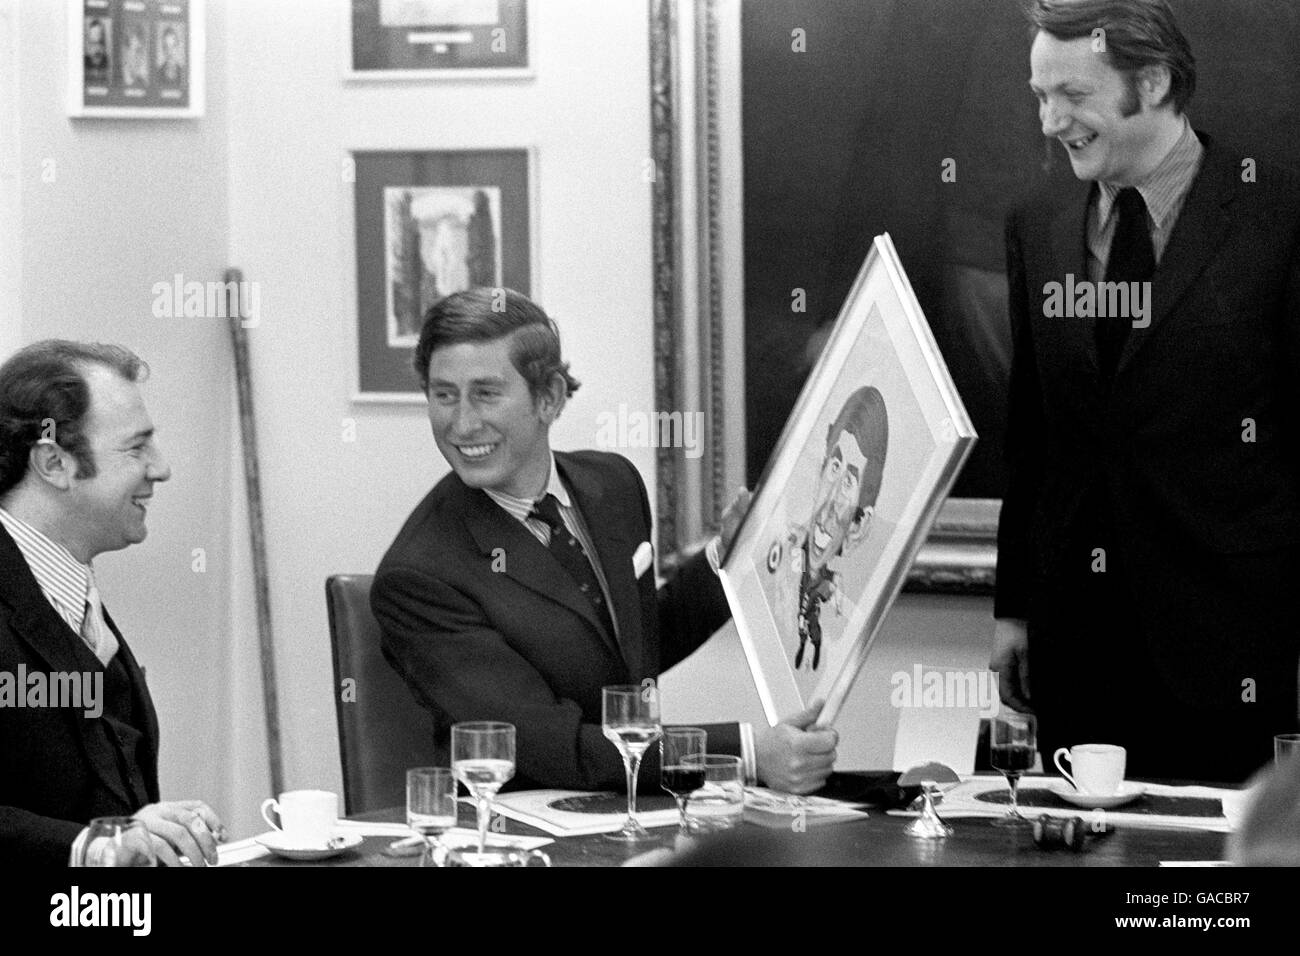 Not for the first time, the magazine raises a royal smile - this time it's from Prince Charles, who is featured on the front cover of next week's issue. The caricature was presented tohim during his visit to the magazine in Tudor Street, today. On the left is Mr Alan Coren, Deputy Editor of Punch. Stock Photo